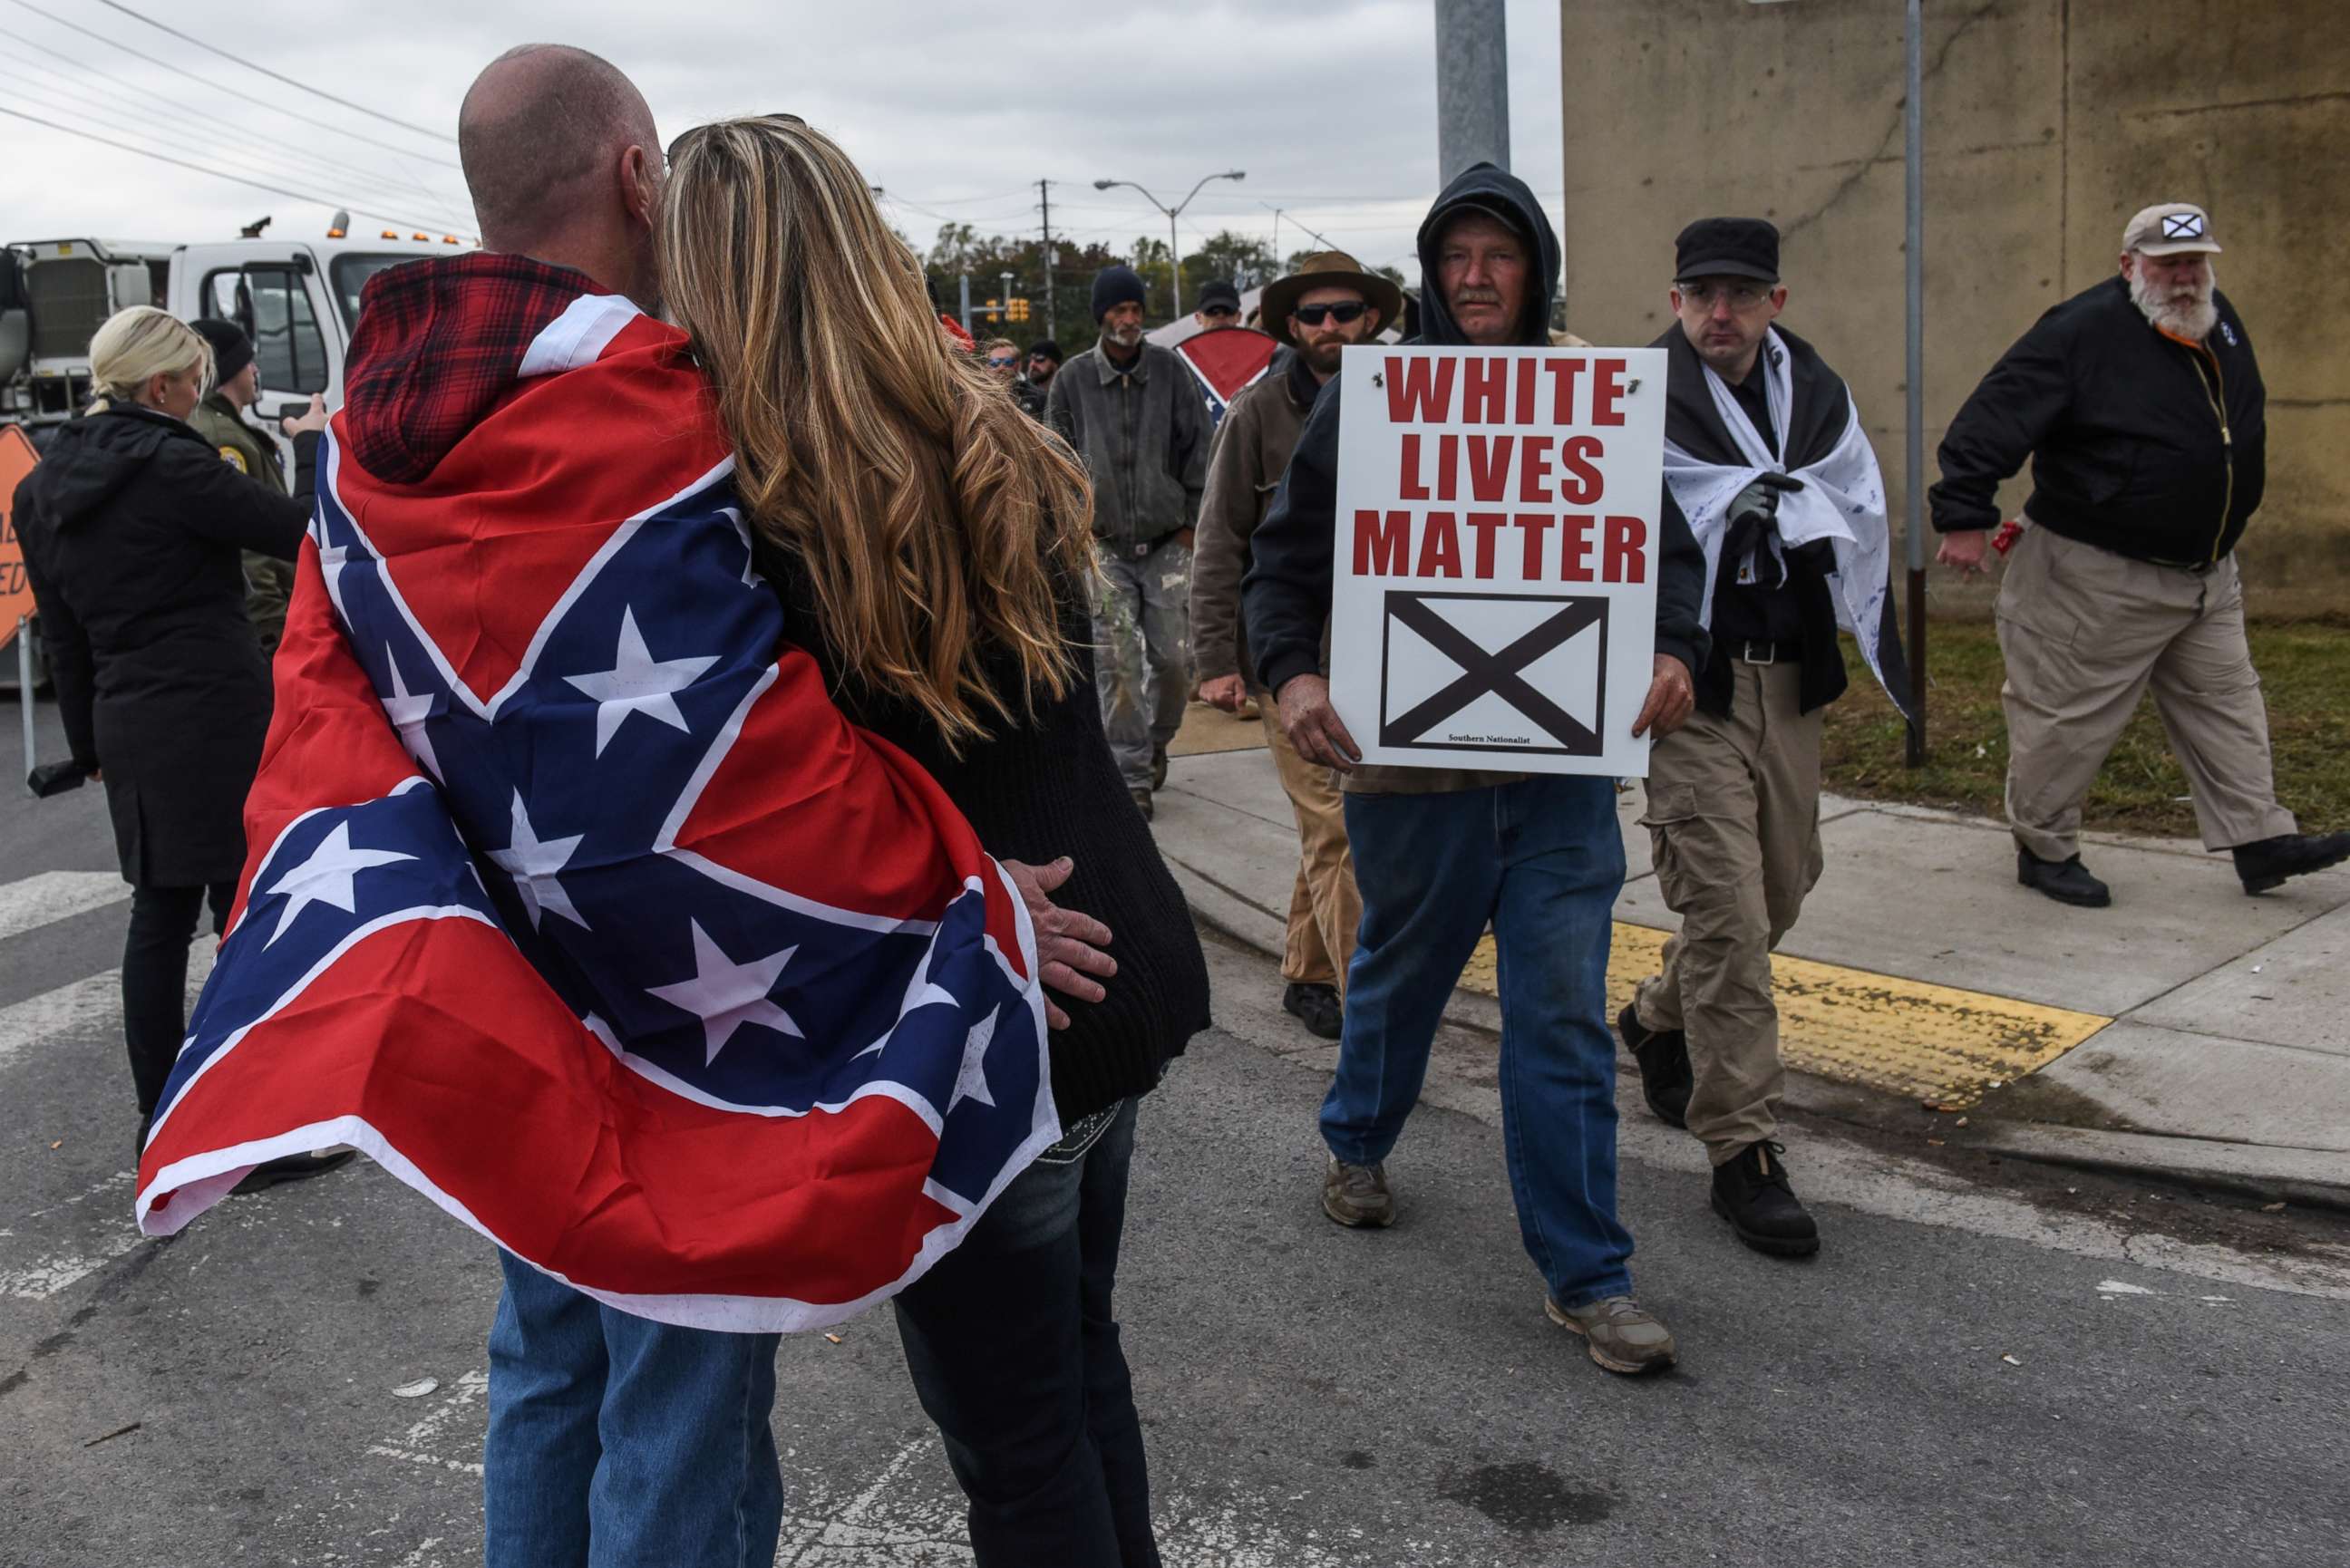 PHOTO: People participate in a "White Lives Matter" rally in Shelbyville, Tenn., Oct. 28, 2017.